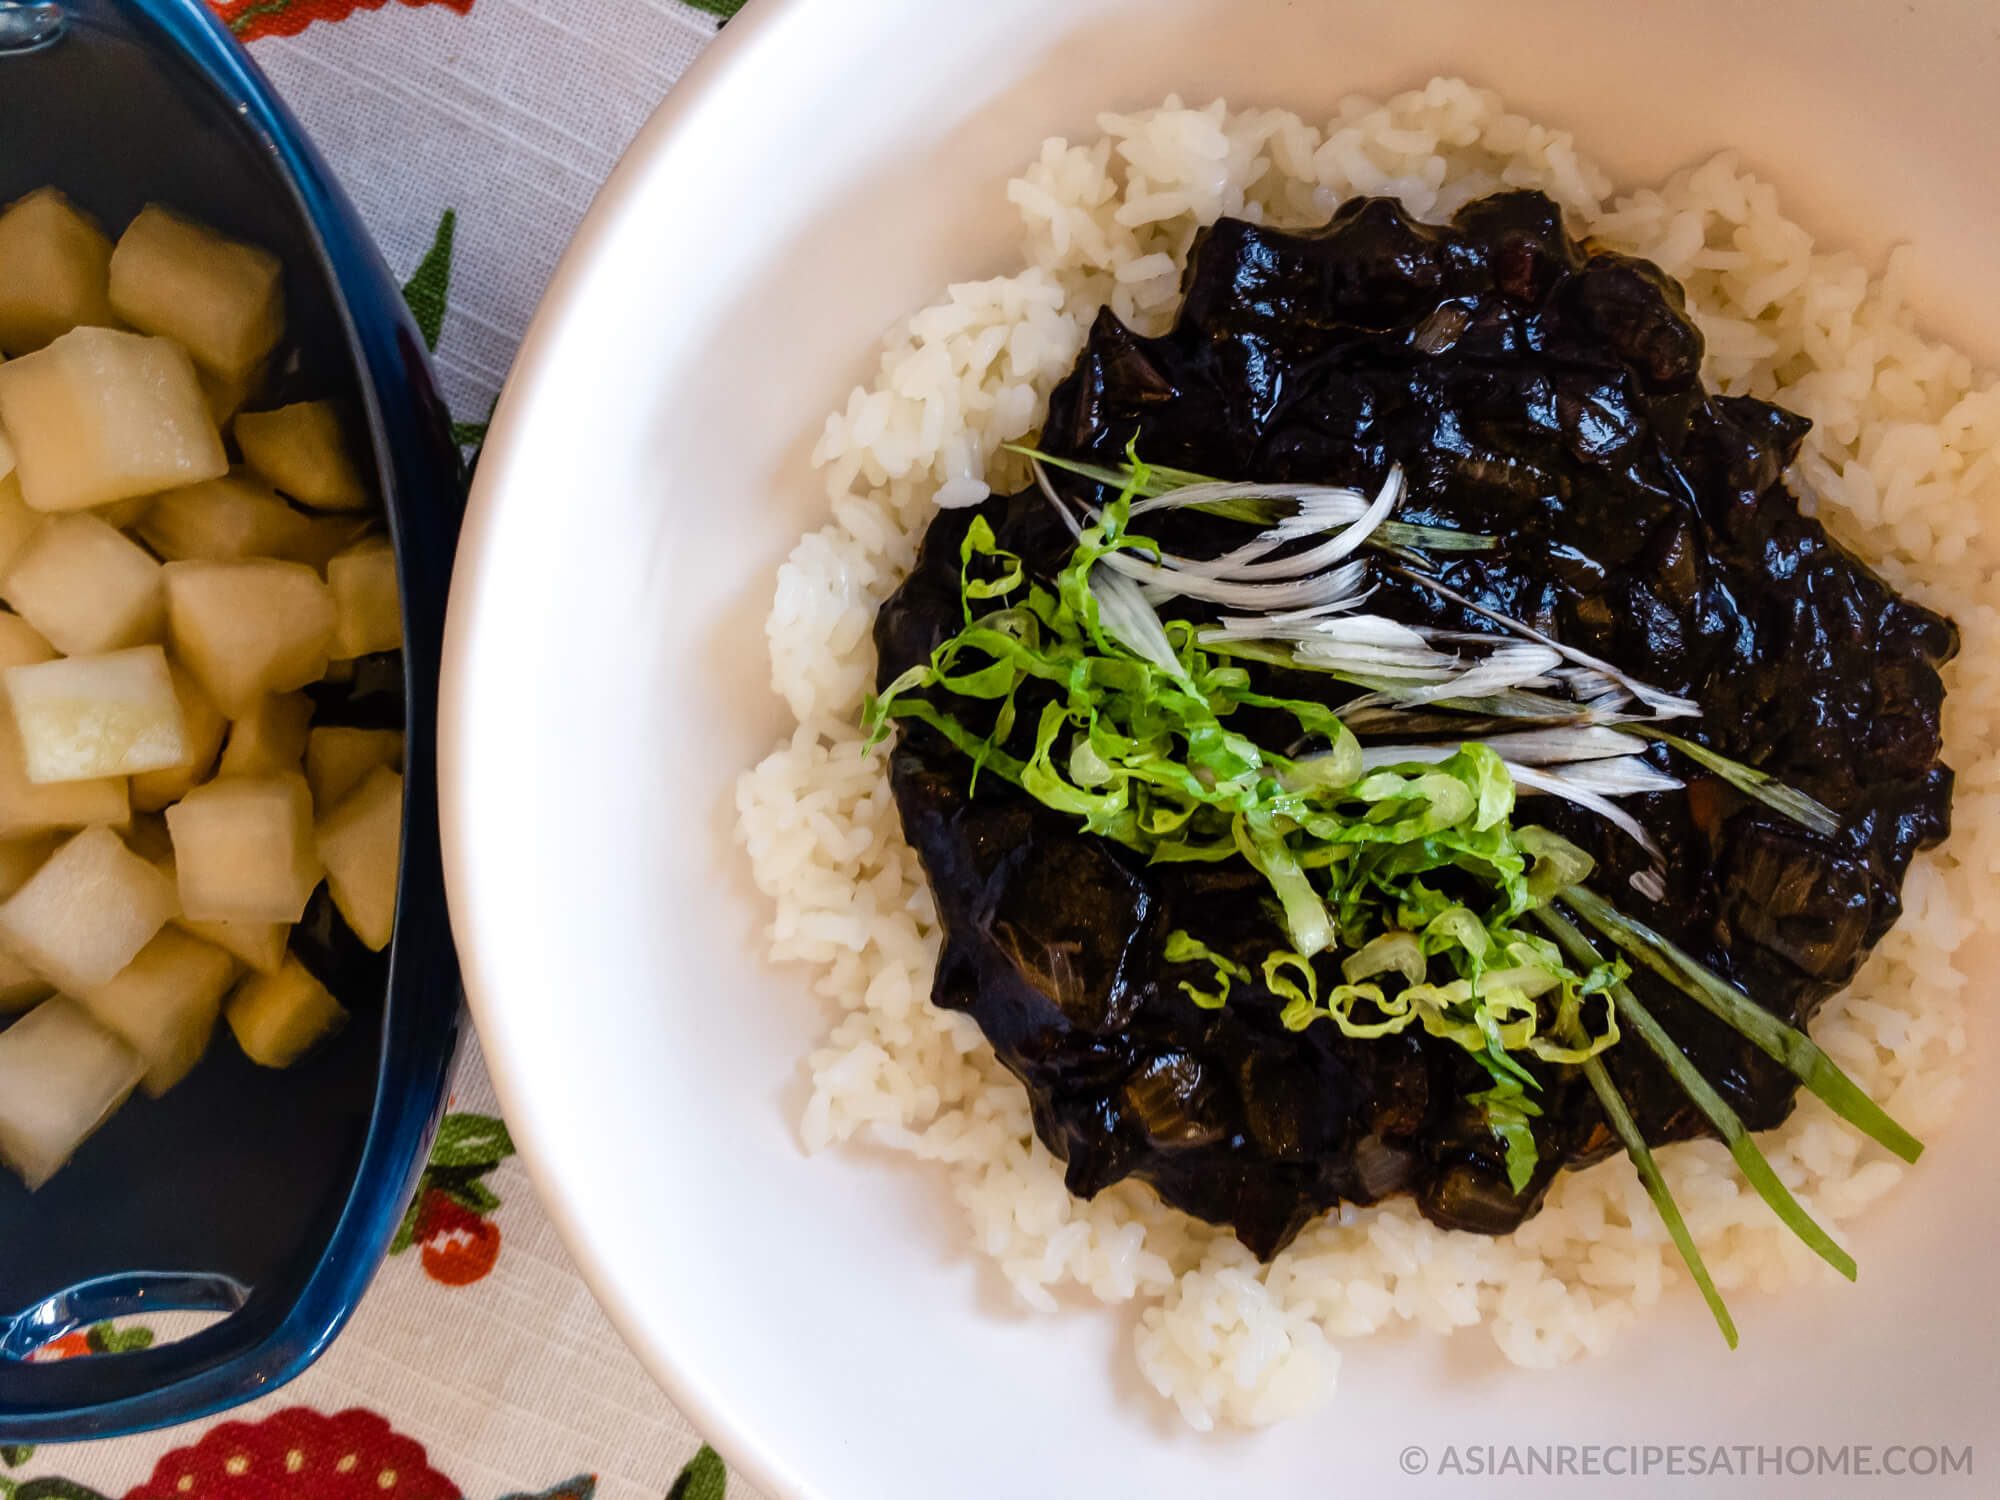 Our Korean-Chinese jjajang rice (jjajangbap 짜장밥) recipe consists of a delicious black bean sauce poured on top of a bed of rice.